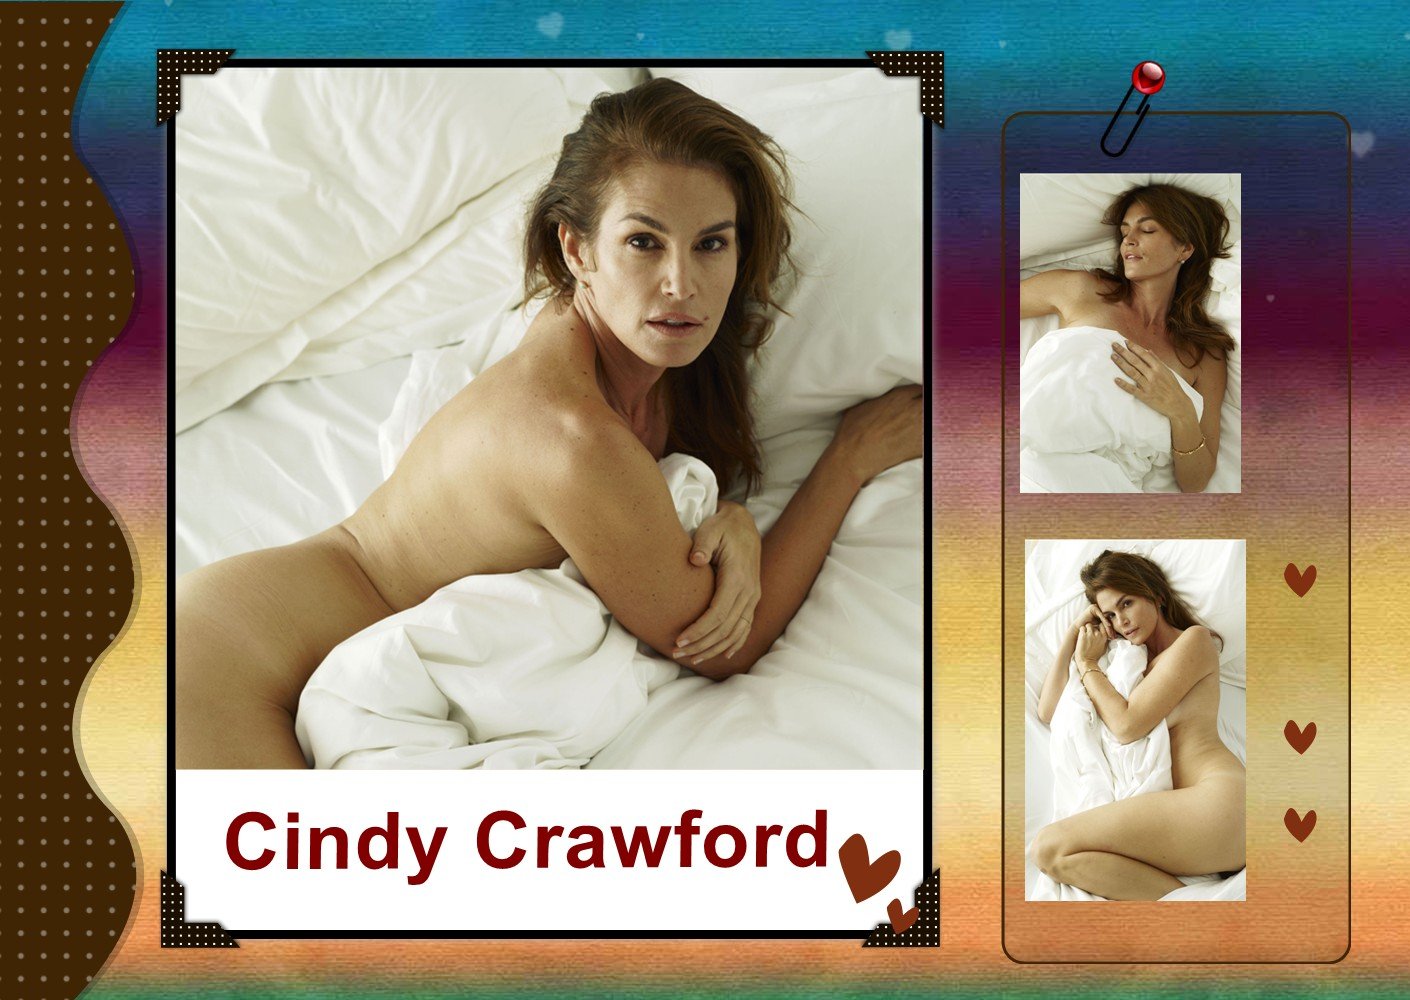 Naked Cindy Crawford Showing Her Mature Boobies in Bed (3 Photos)